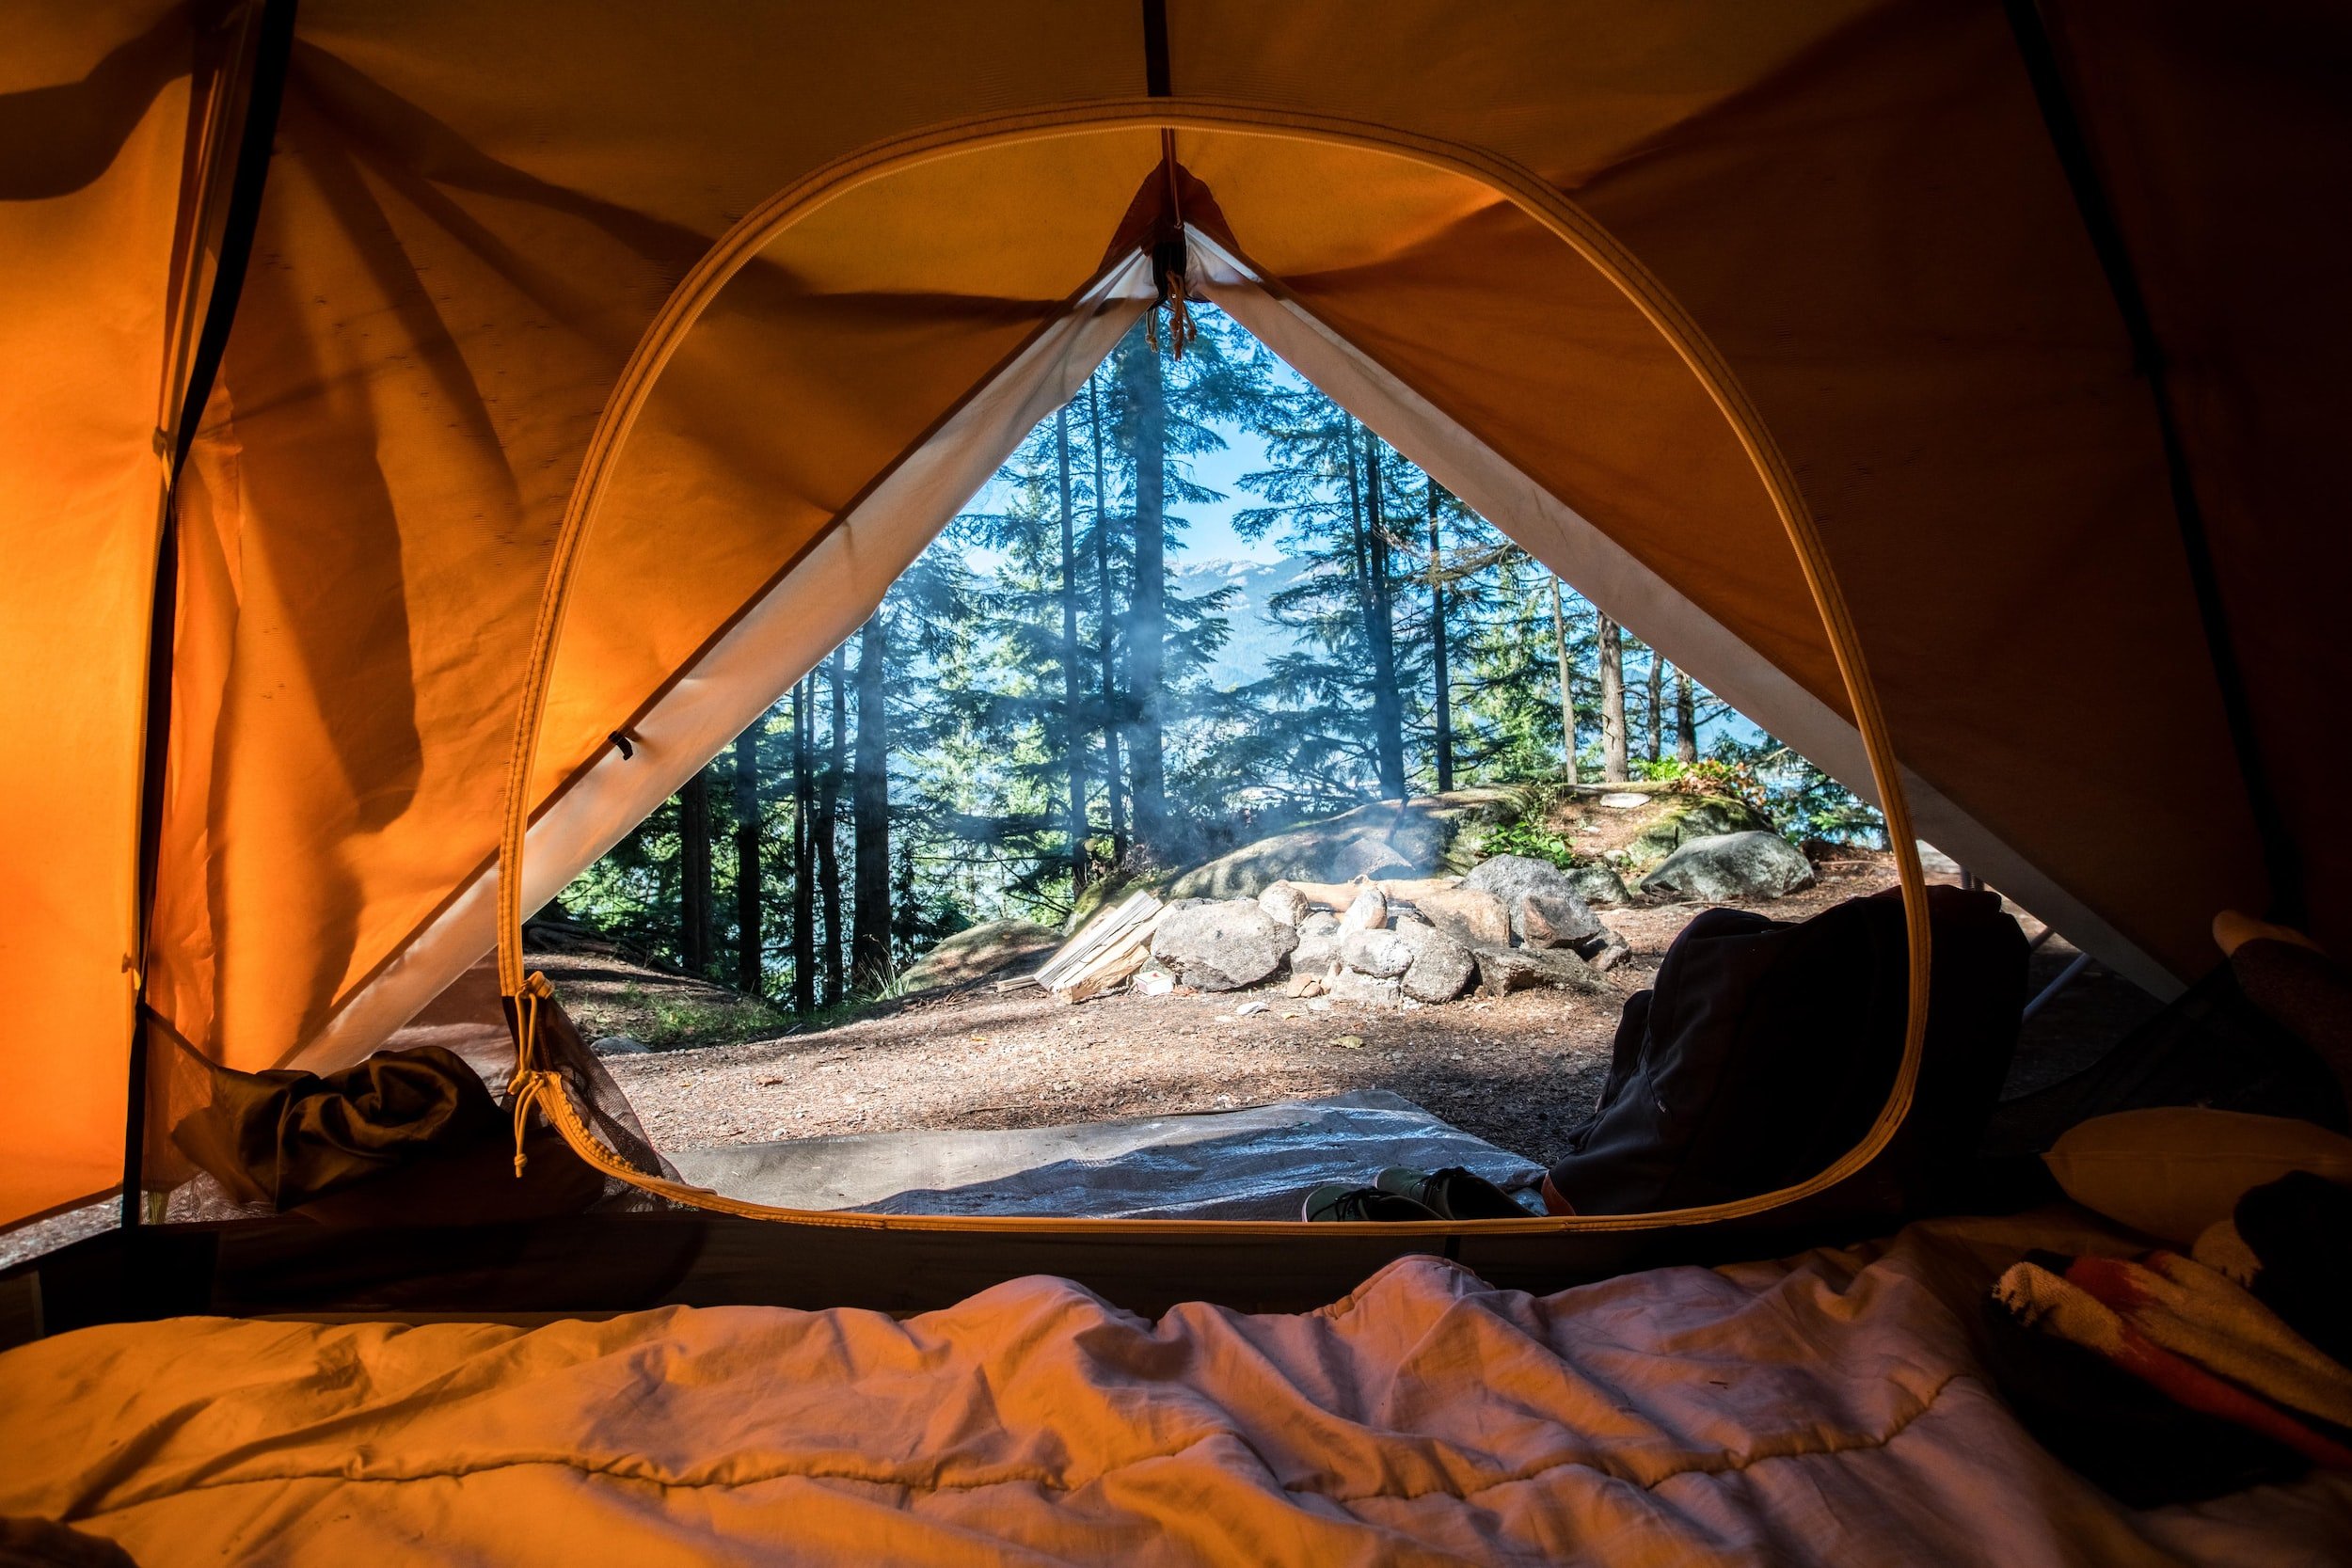 Camping Gear: The Importance of Reliable Camping Equipment 